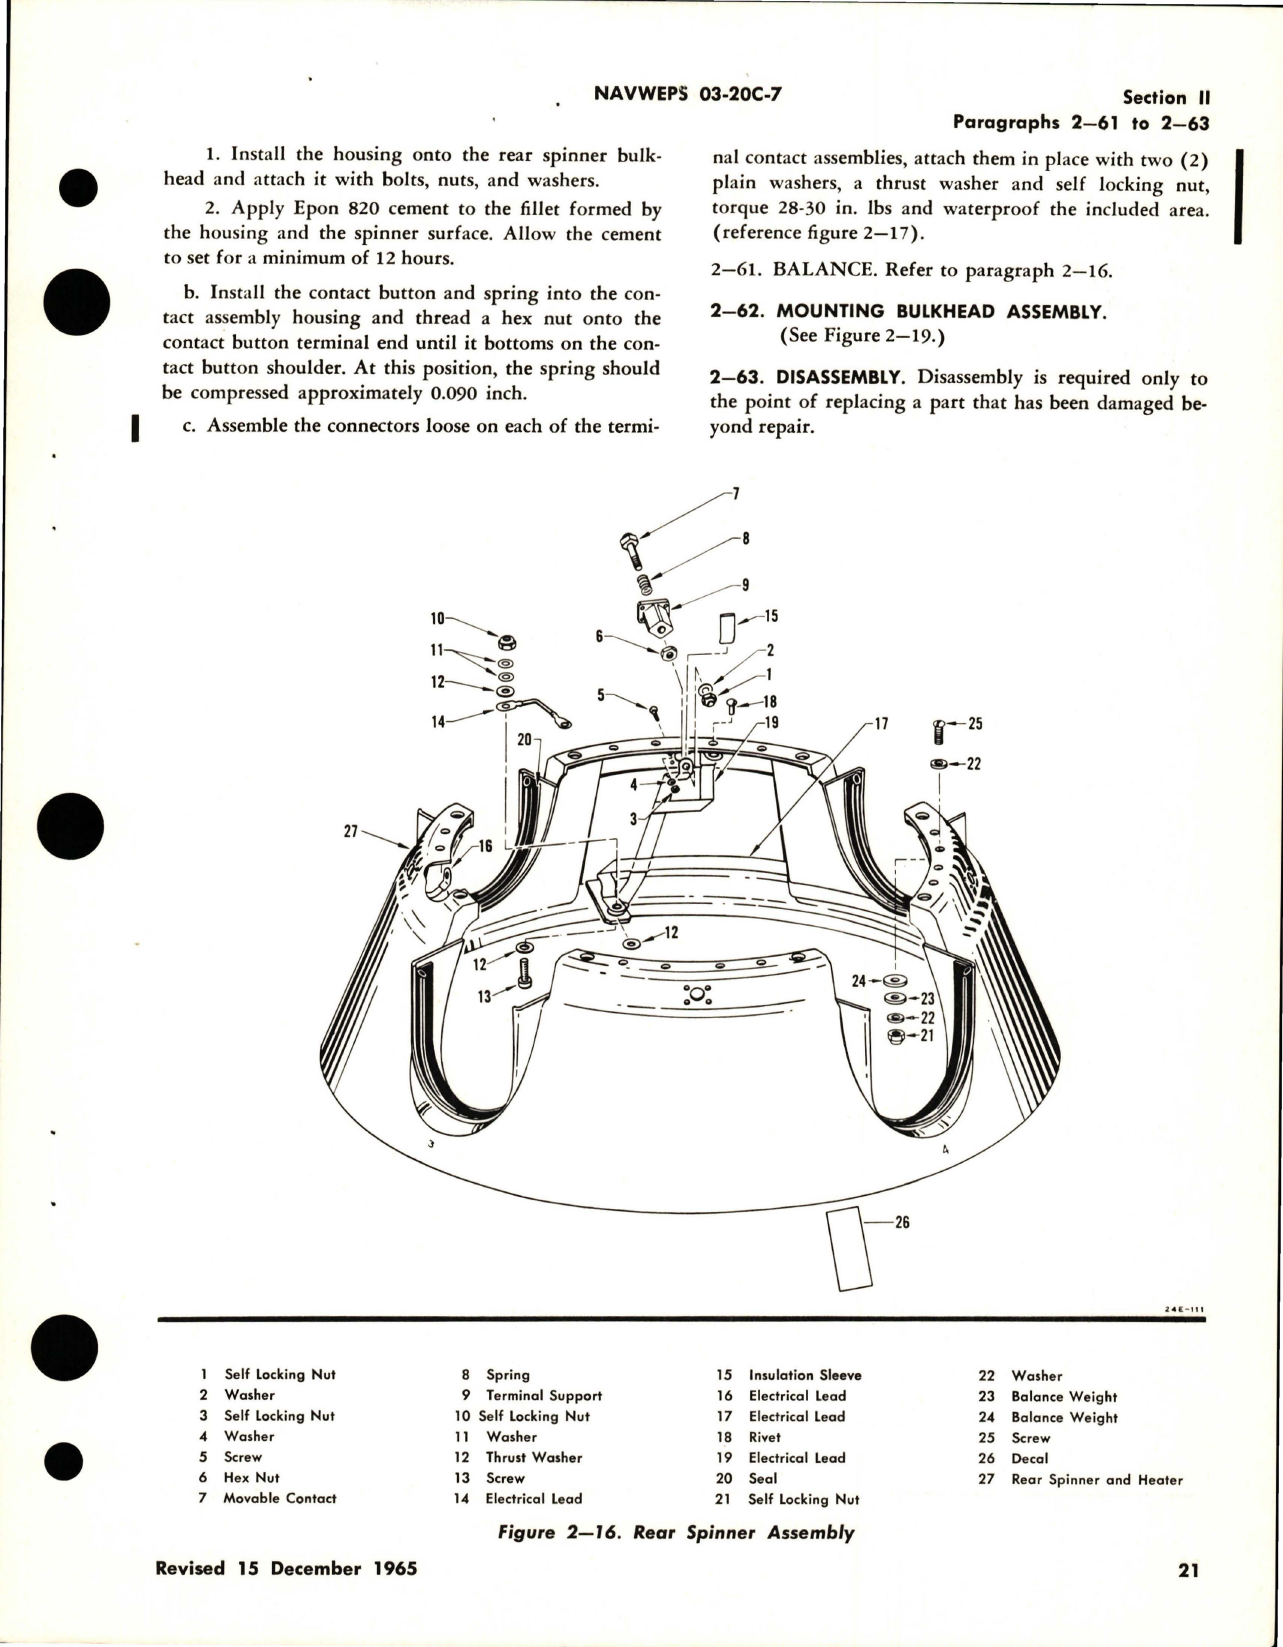 Sample page 7 from AirCorps Library document: Overhaul Instructions for Aircraft Propeller Spinner and Anti-Icing - Assembly No. Spinner 549427 and Afterbody 557635